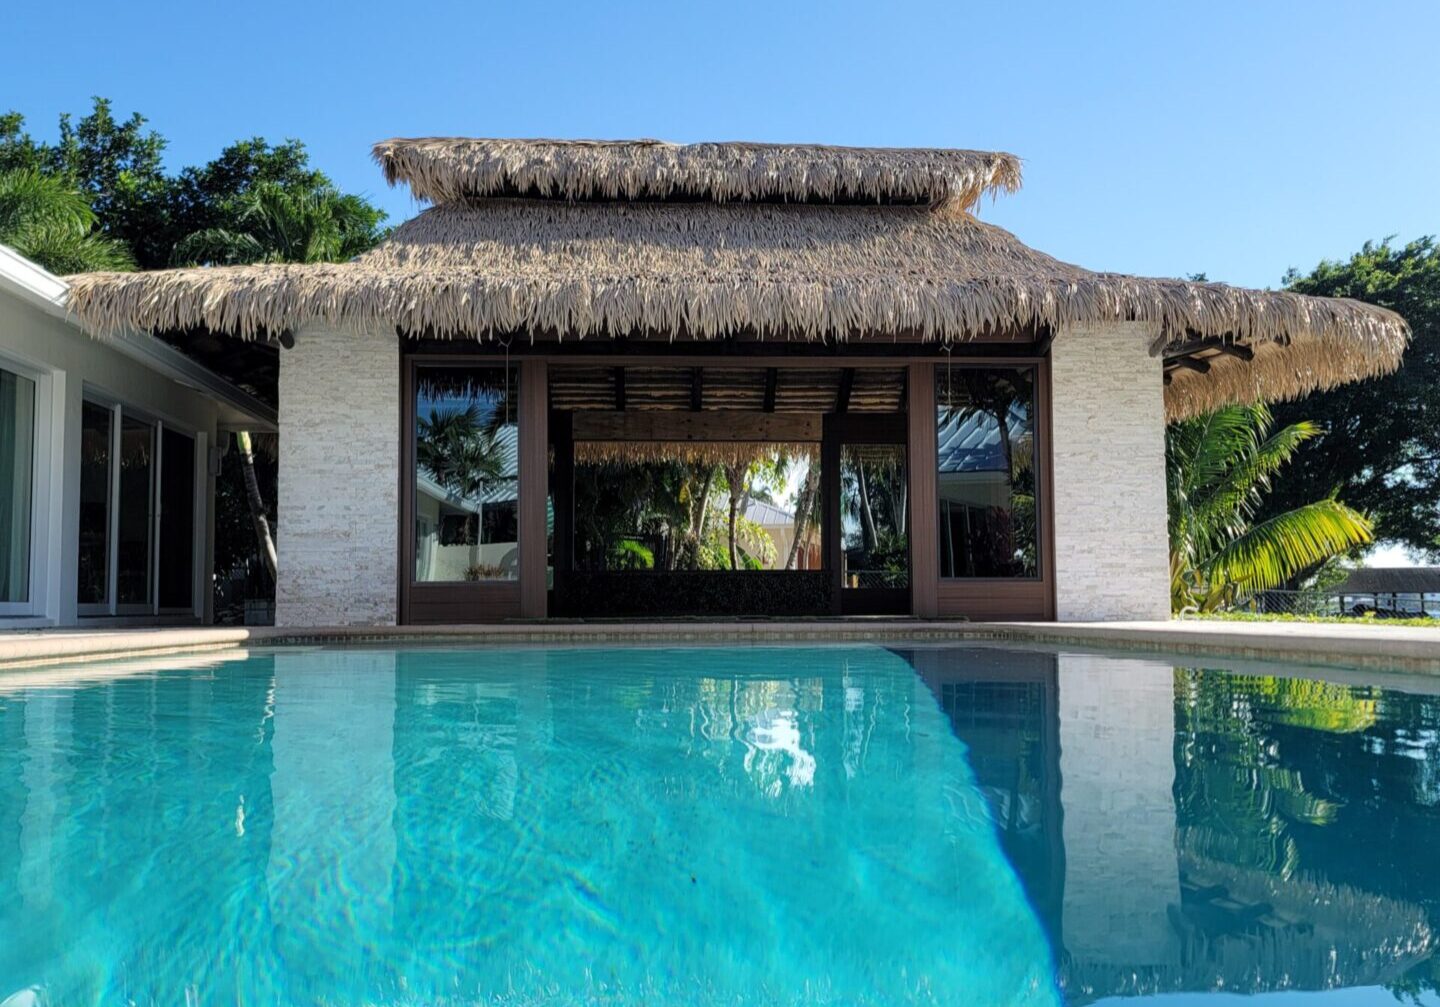 A swimming pool with a thatched roof.